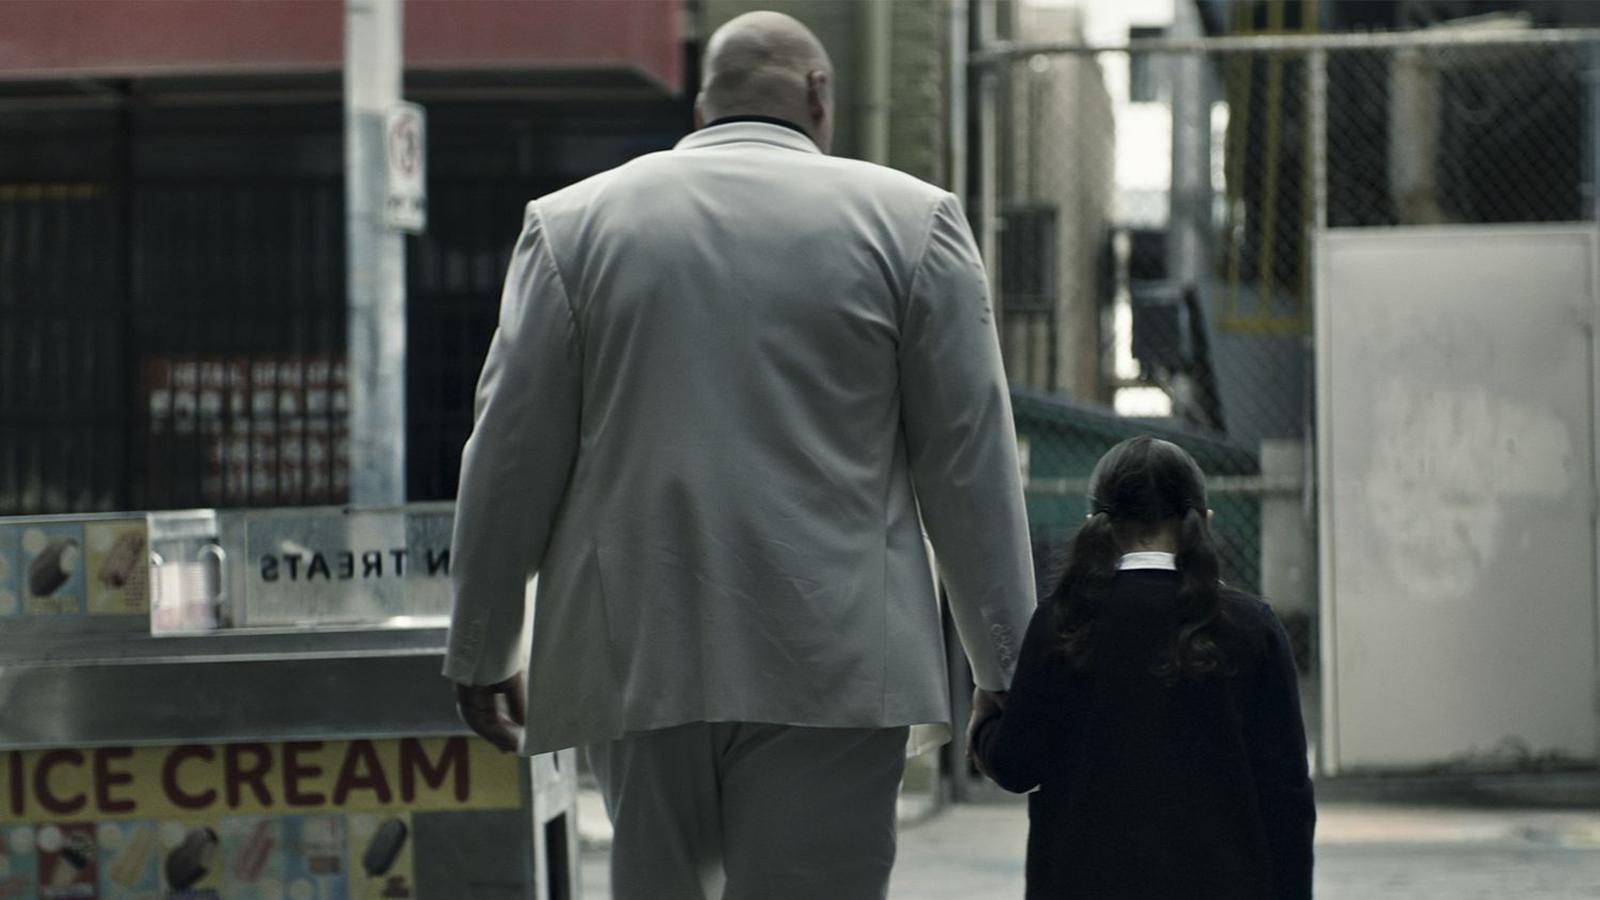 Wilson Fisk/Kingpin and the young Maya Lopez in Echo